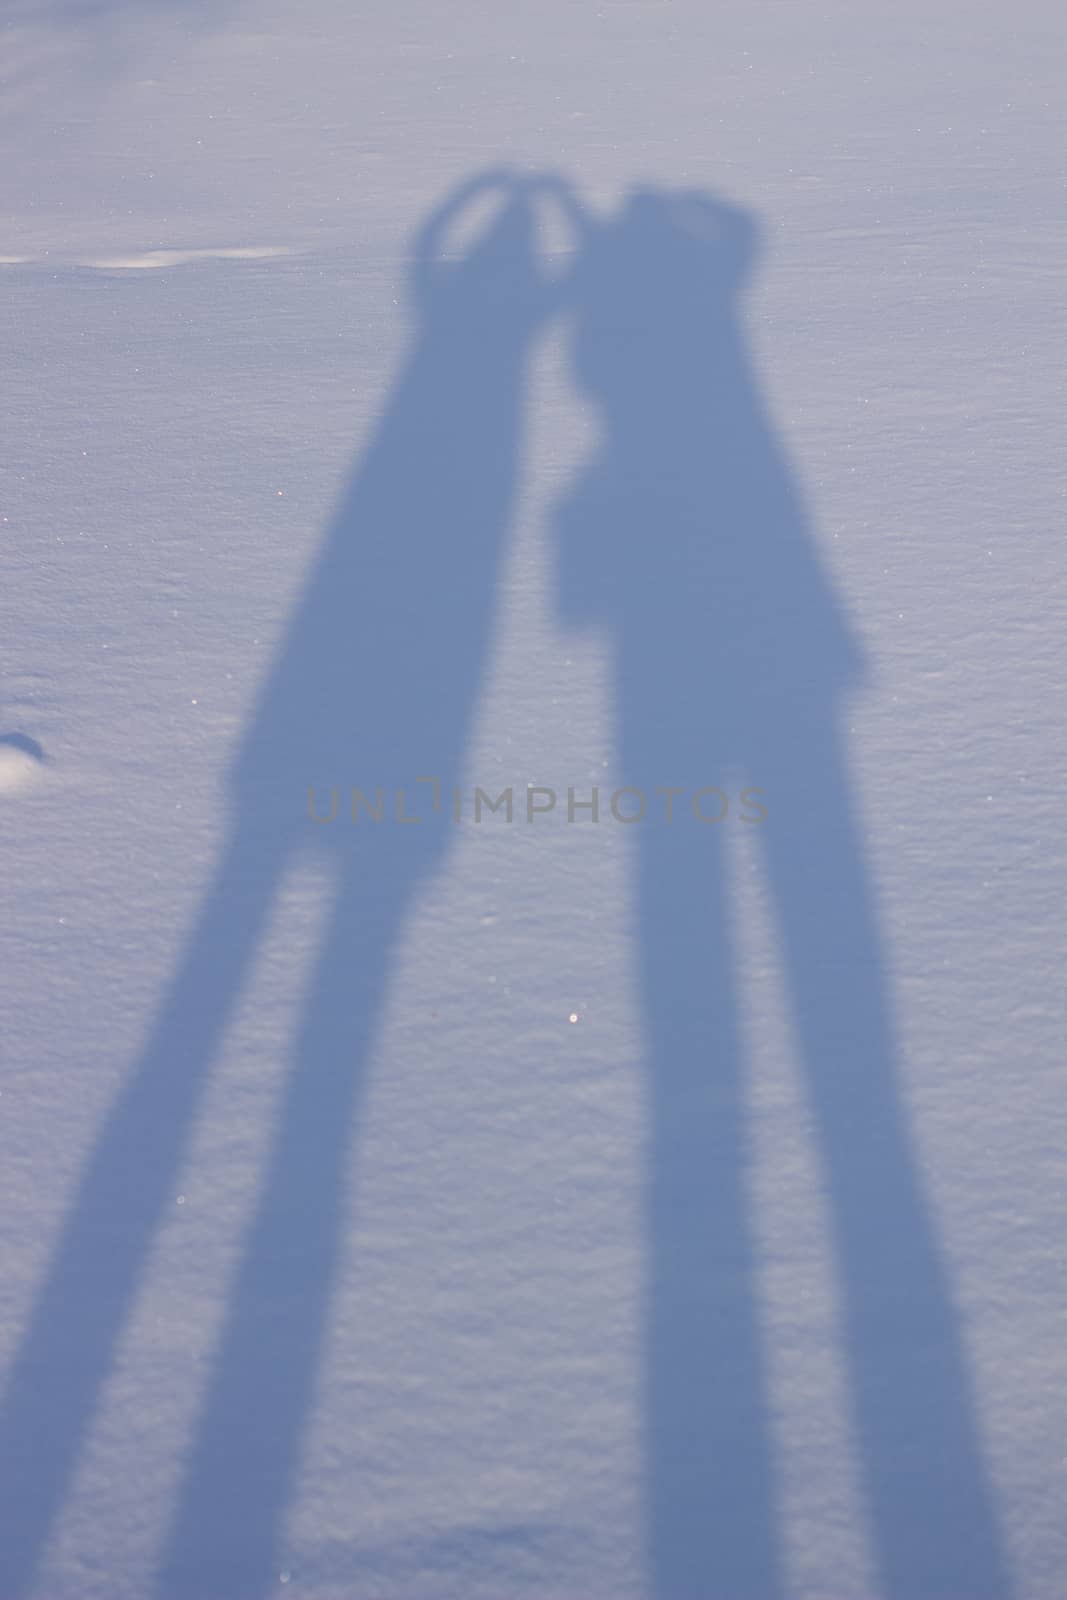 Holding hands creating a shadow in the snow. Shadows of people in the snow